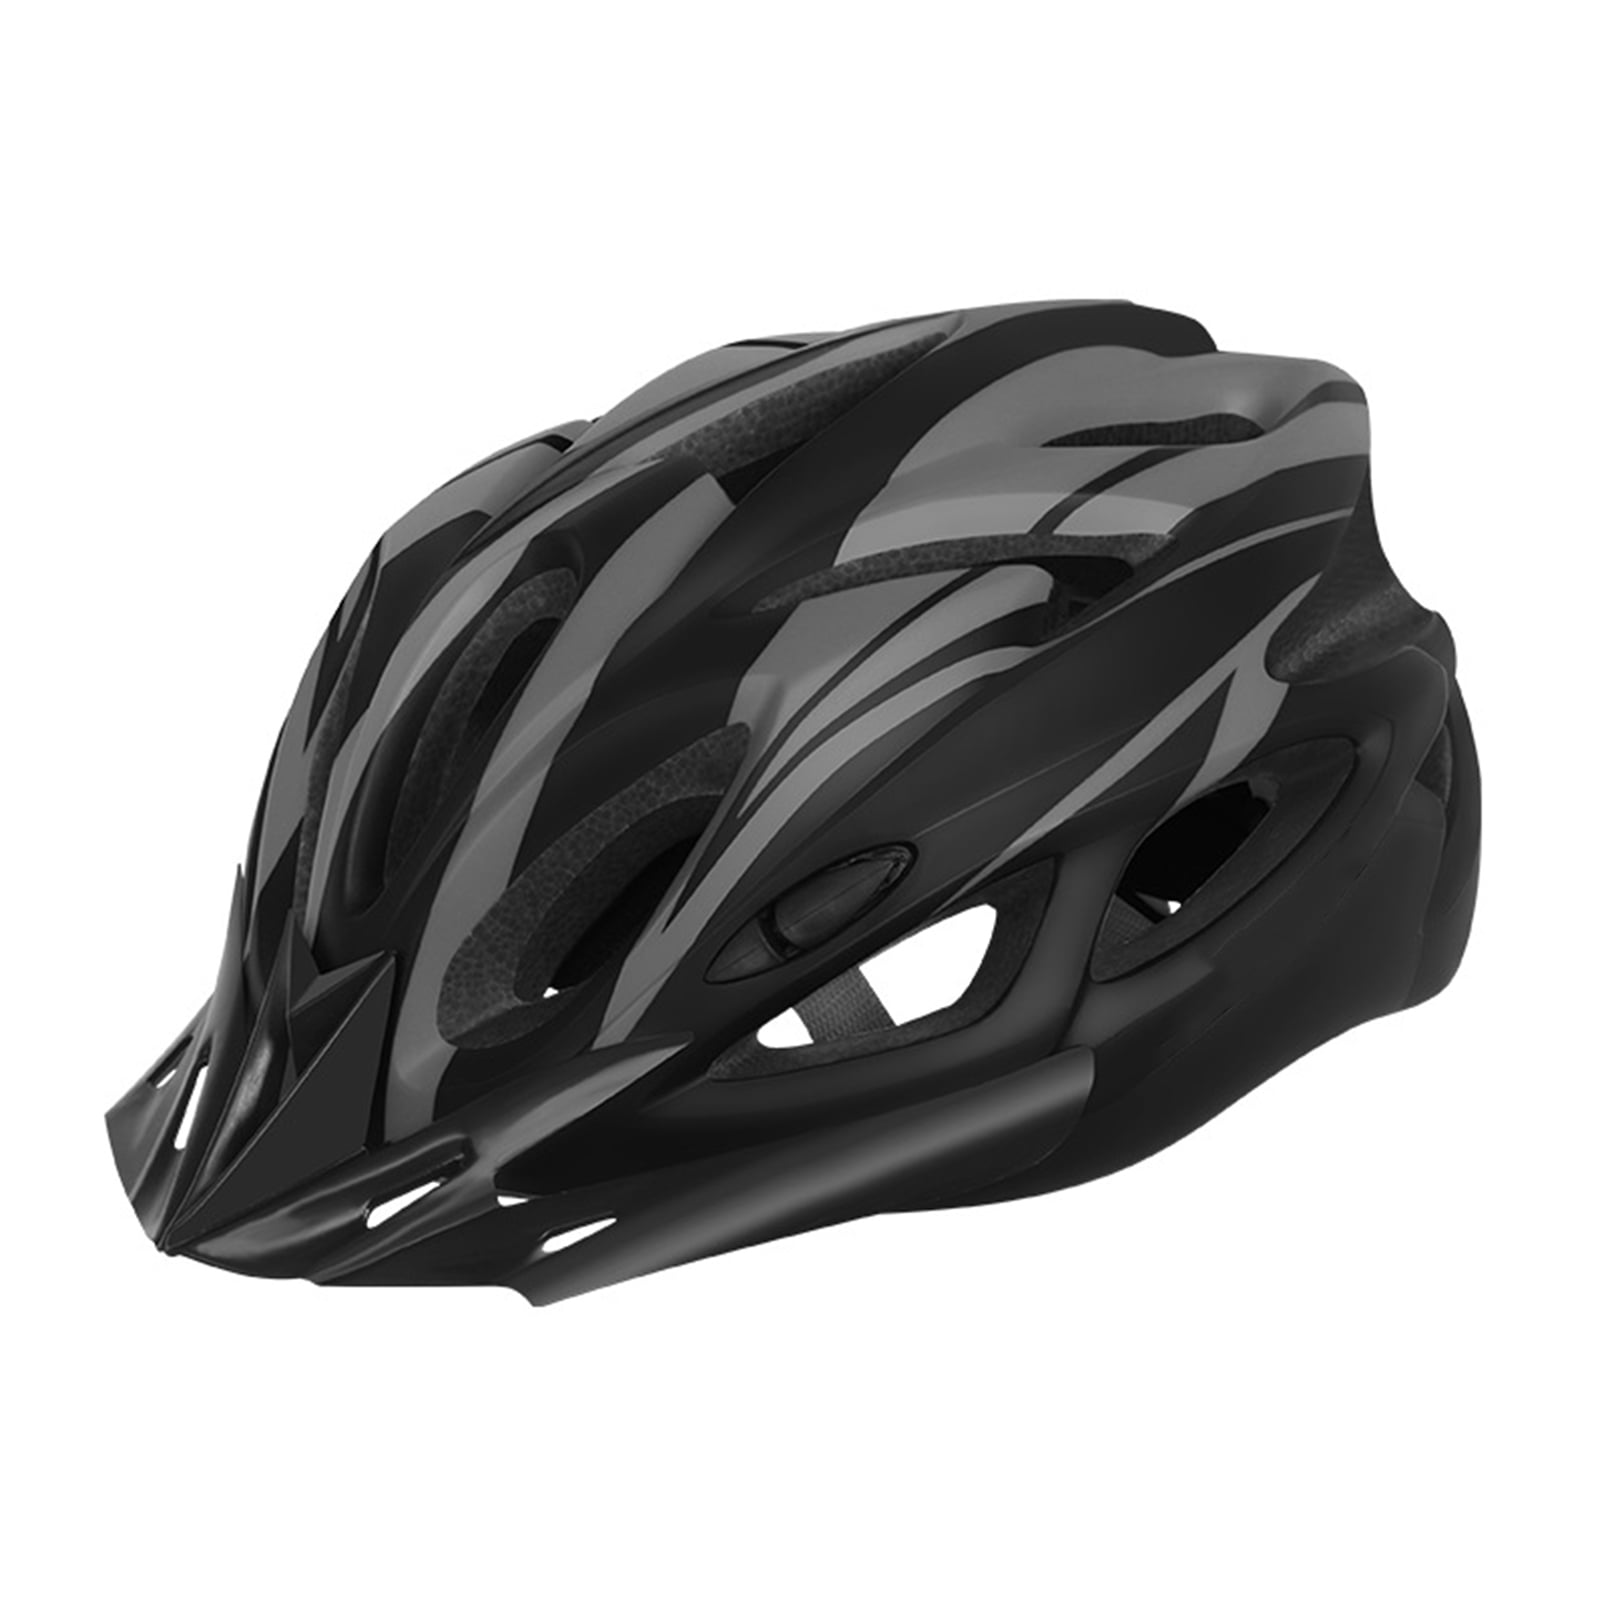 Details about   Protective Mens Adult Road Cycling Safety Helmet MTB Mountain Bike Bicycle Cycle 